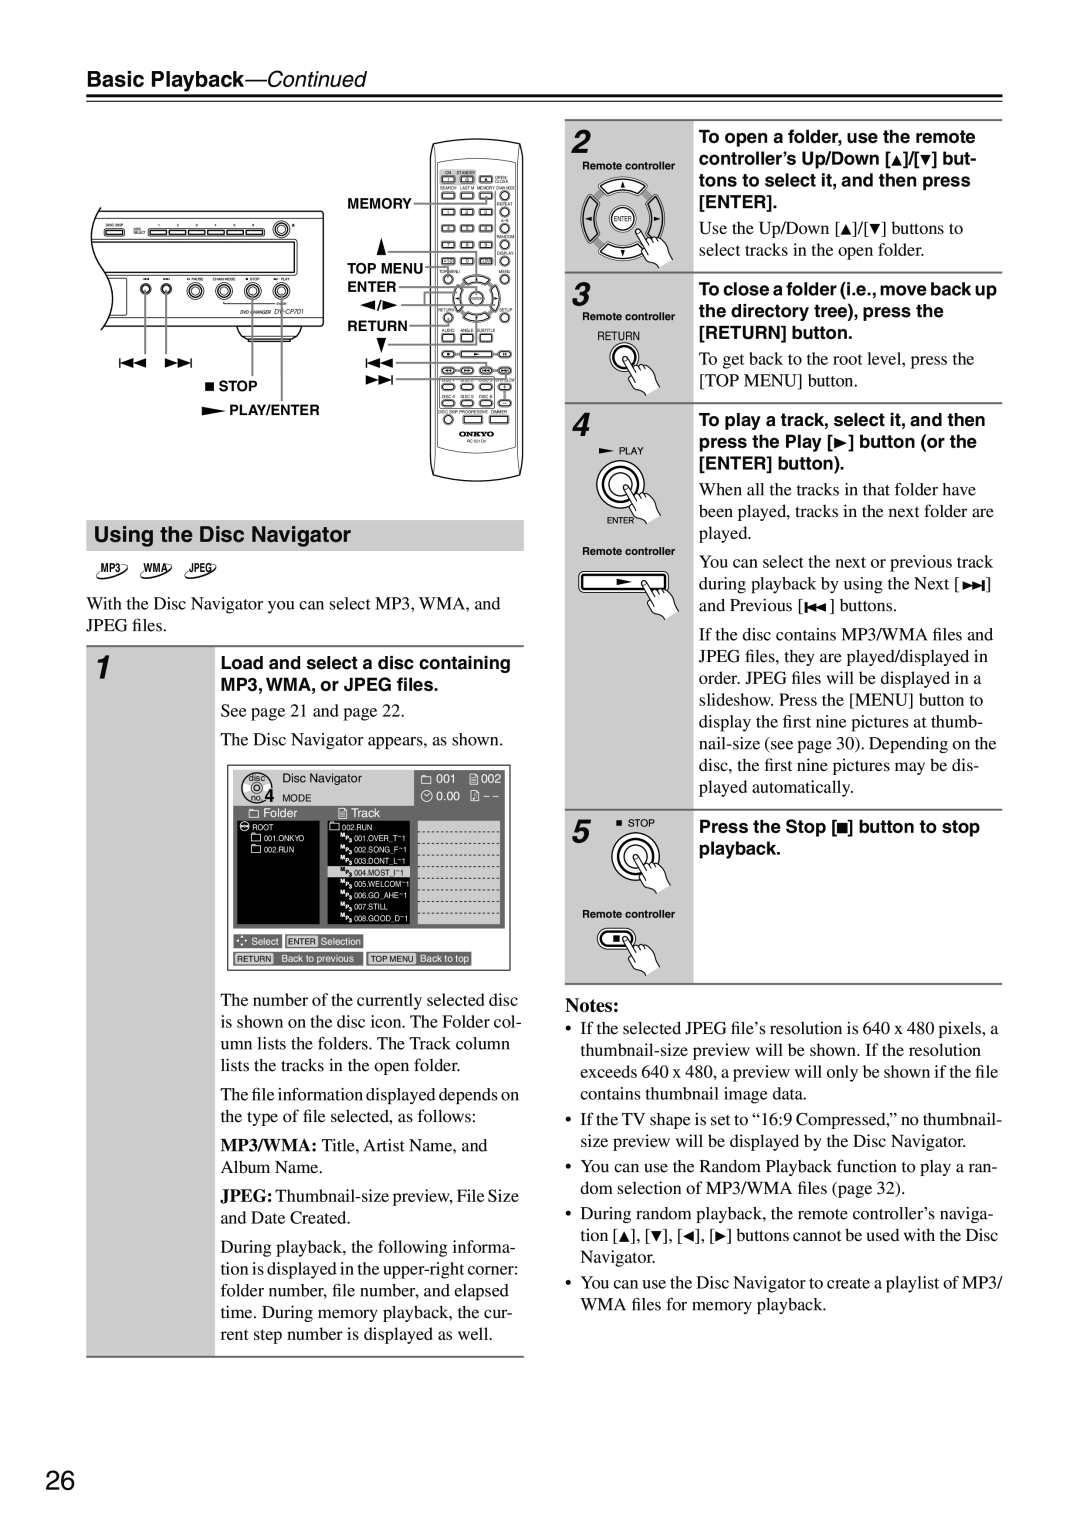 Onkyo DV-CP701 instruction manual Notes, Use the Up/Down / buttons to, select tracks in the open folder, TOP MENU button 